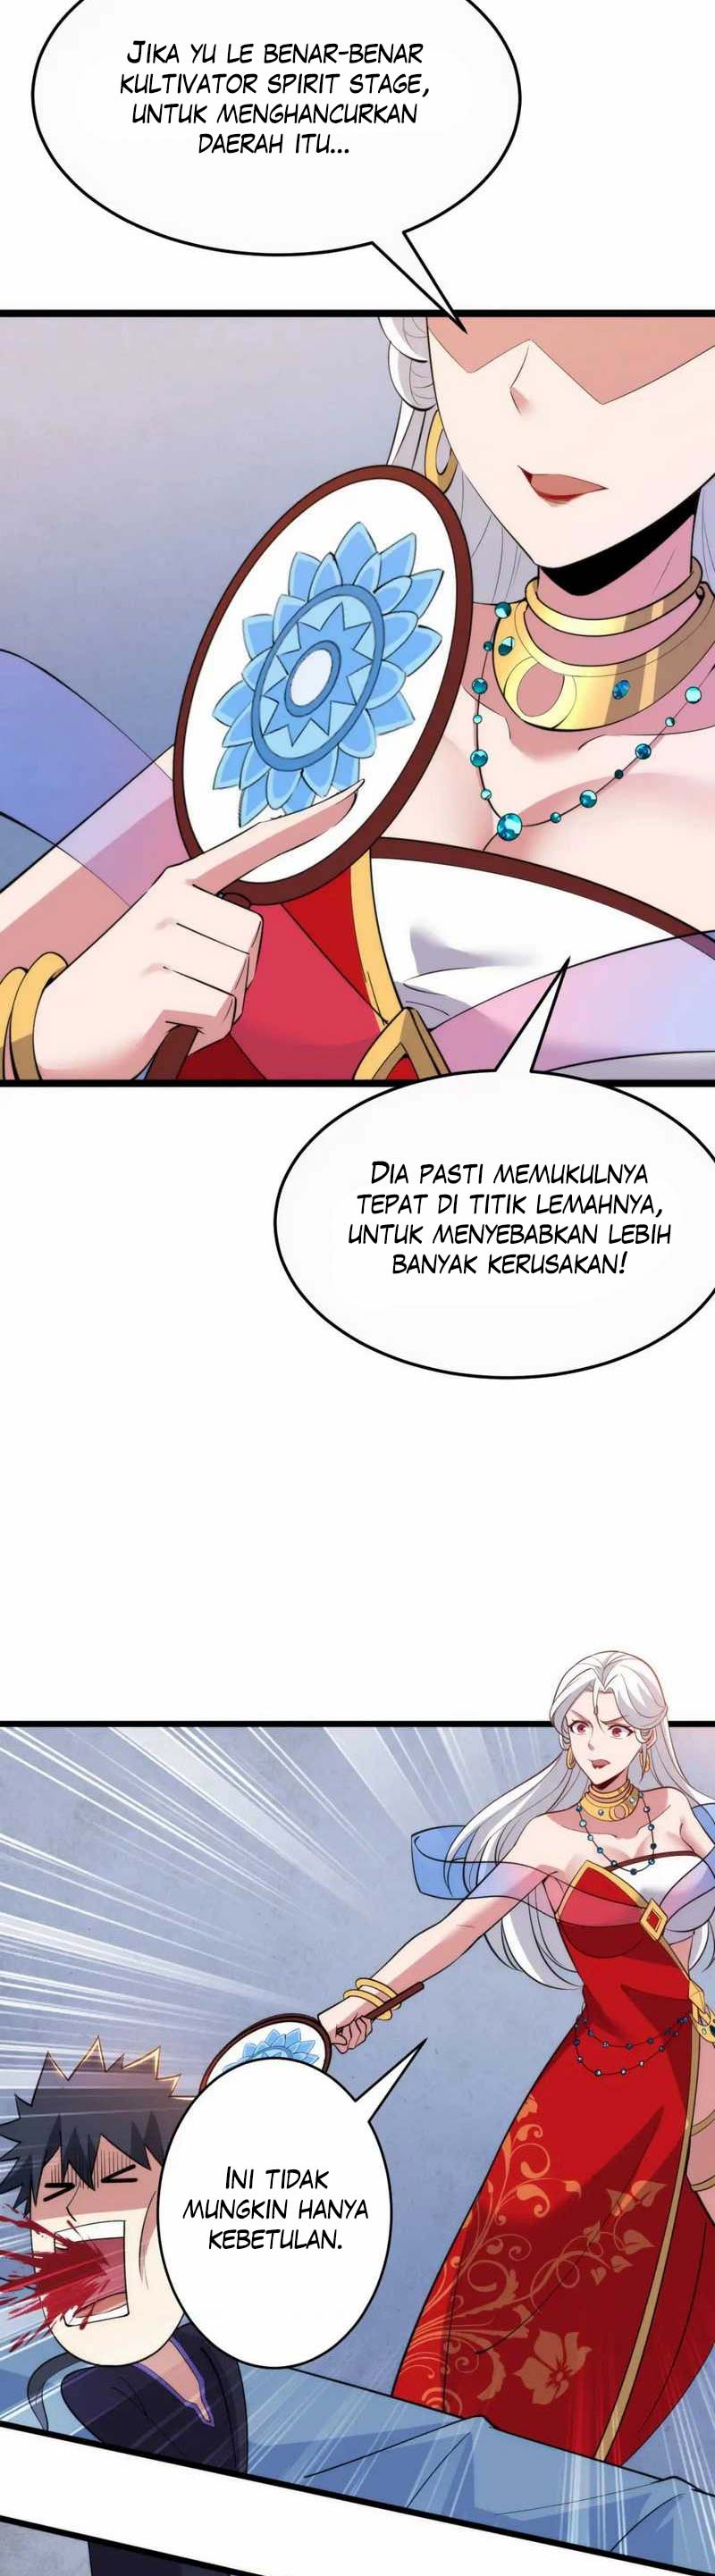 Dilarang COPAS - situs resmi www.mangacanblog.com - Komik i just want to be beaten to death by everyone 138 - chapter 138 139 Indonesia i just want to be beaten to death by everyone 138 - chapter 138 Terbaru 16|Baca Manga Komik Indonesia|Mangacan